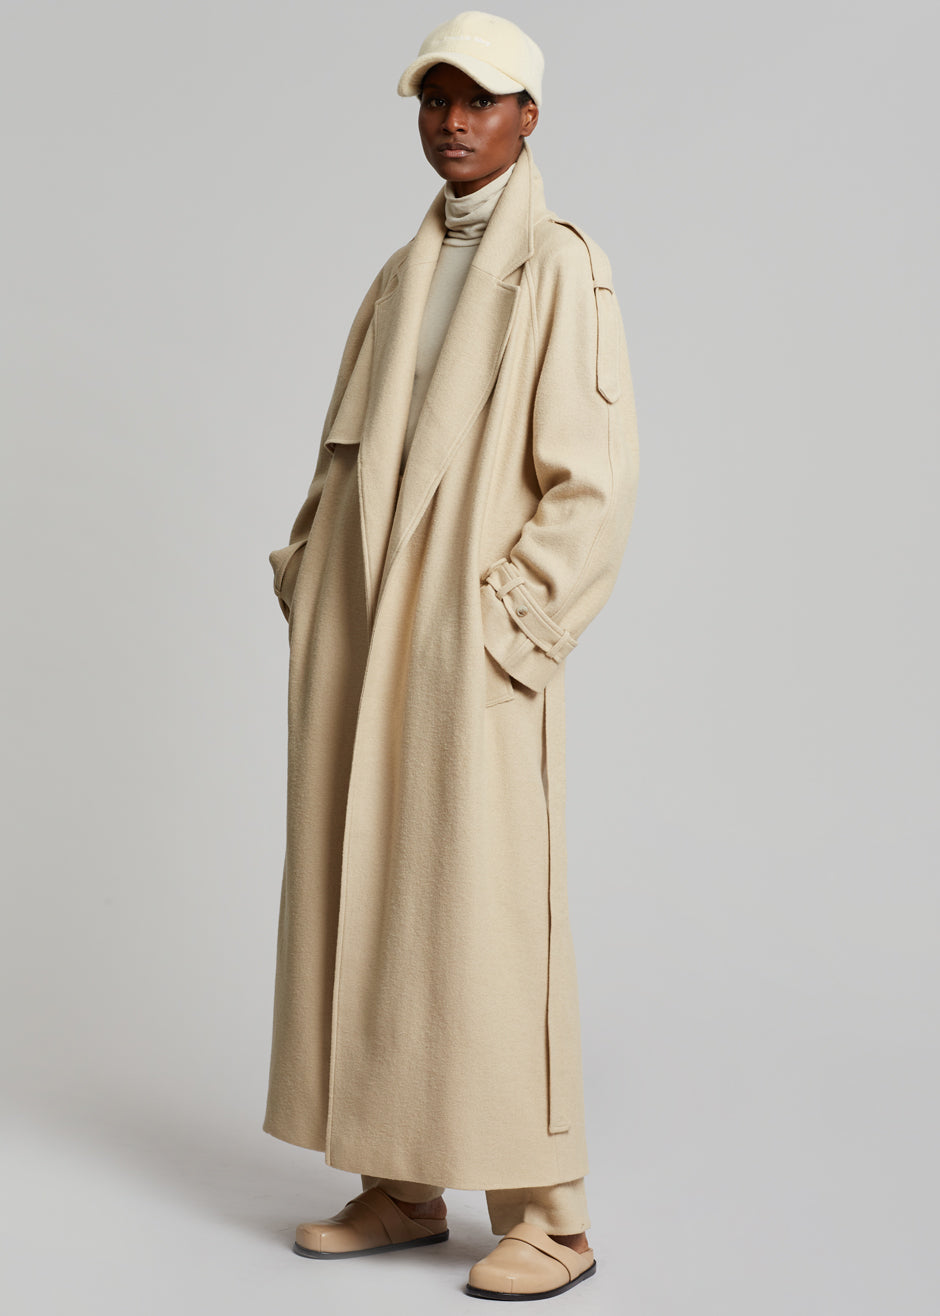 Suzanne Boiled Wool Trench Coat - Beige